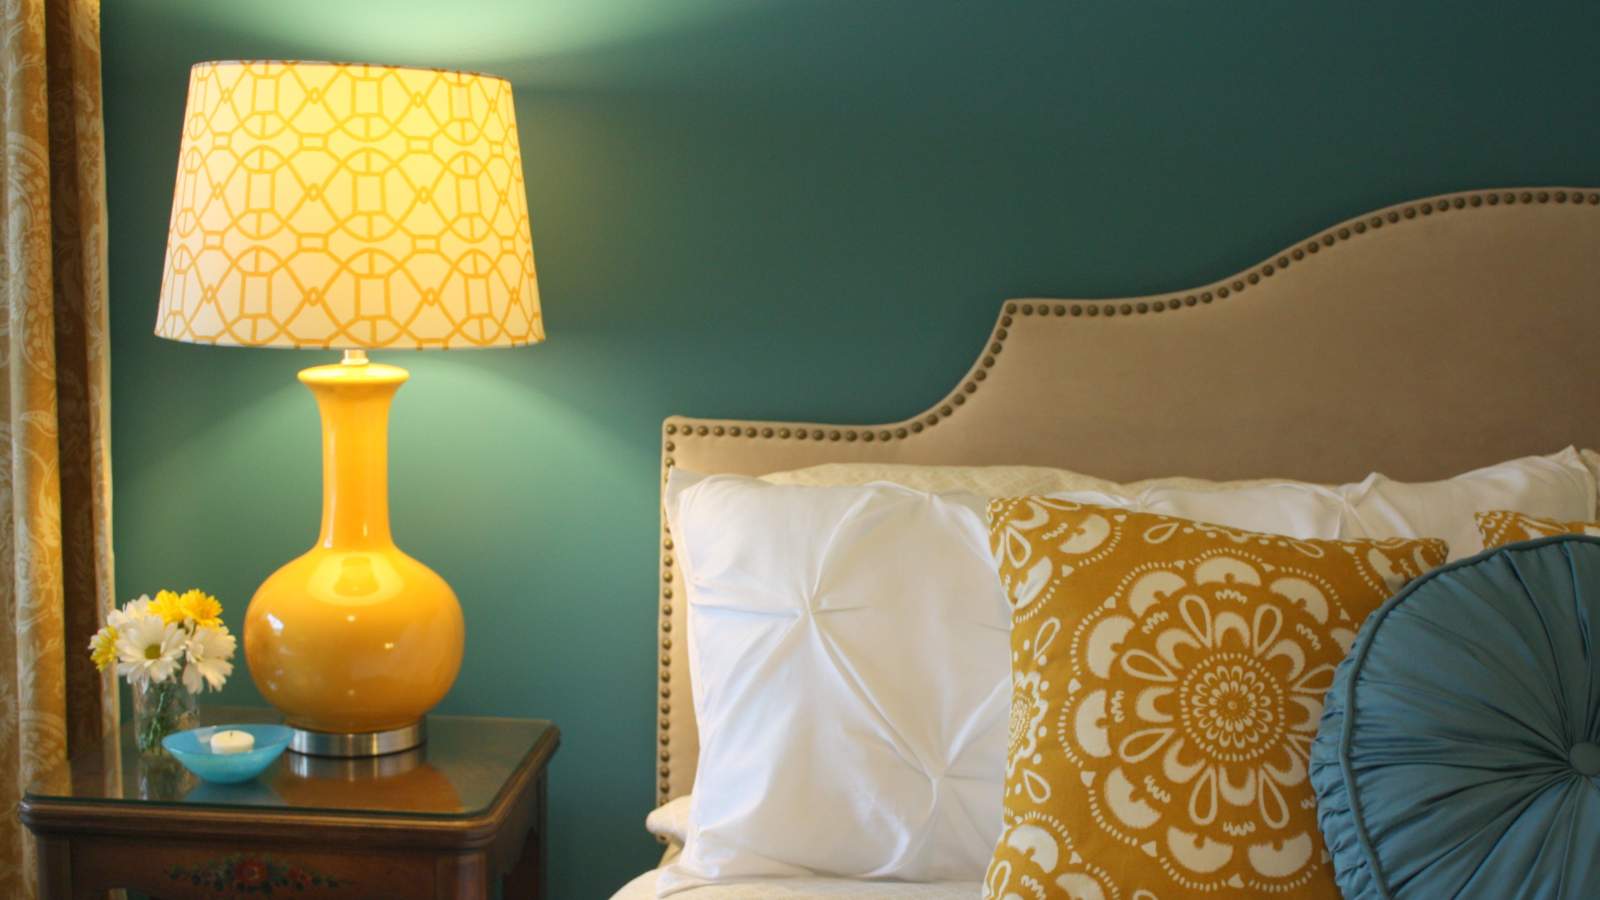 12 Amazing Bedroom Lampshade Samples That Make Your Home Warm